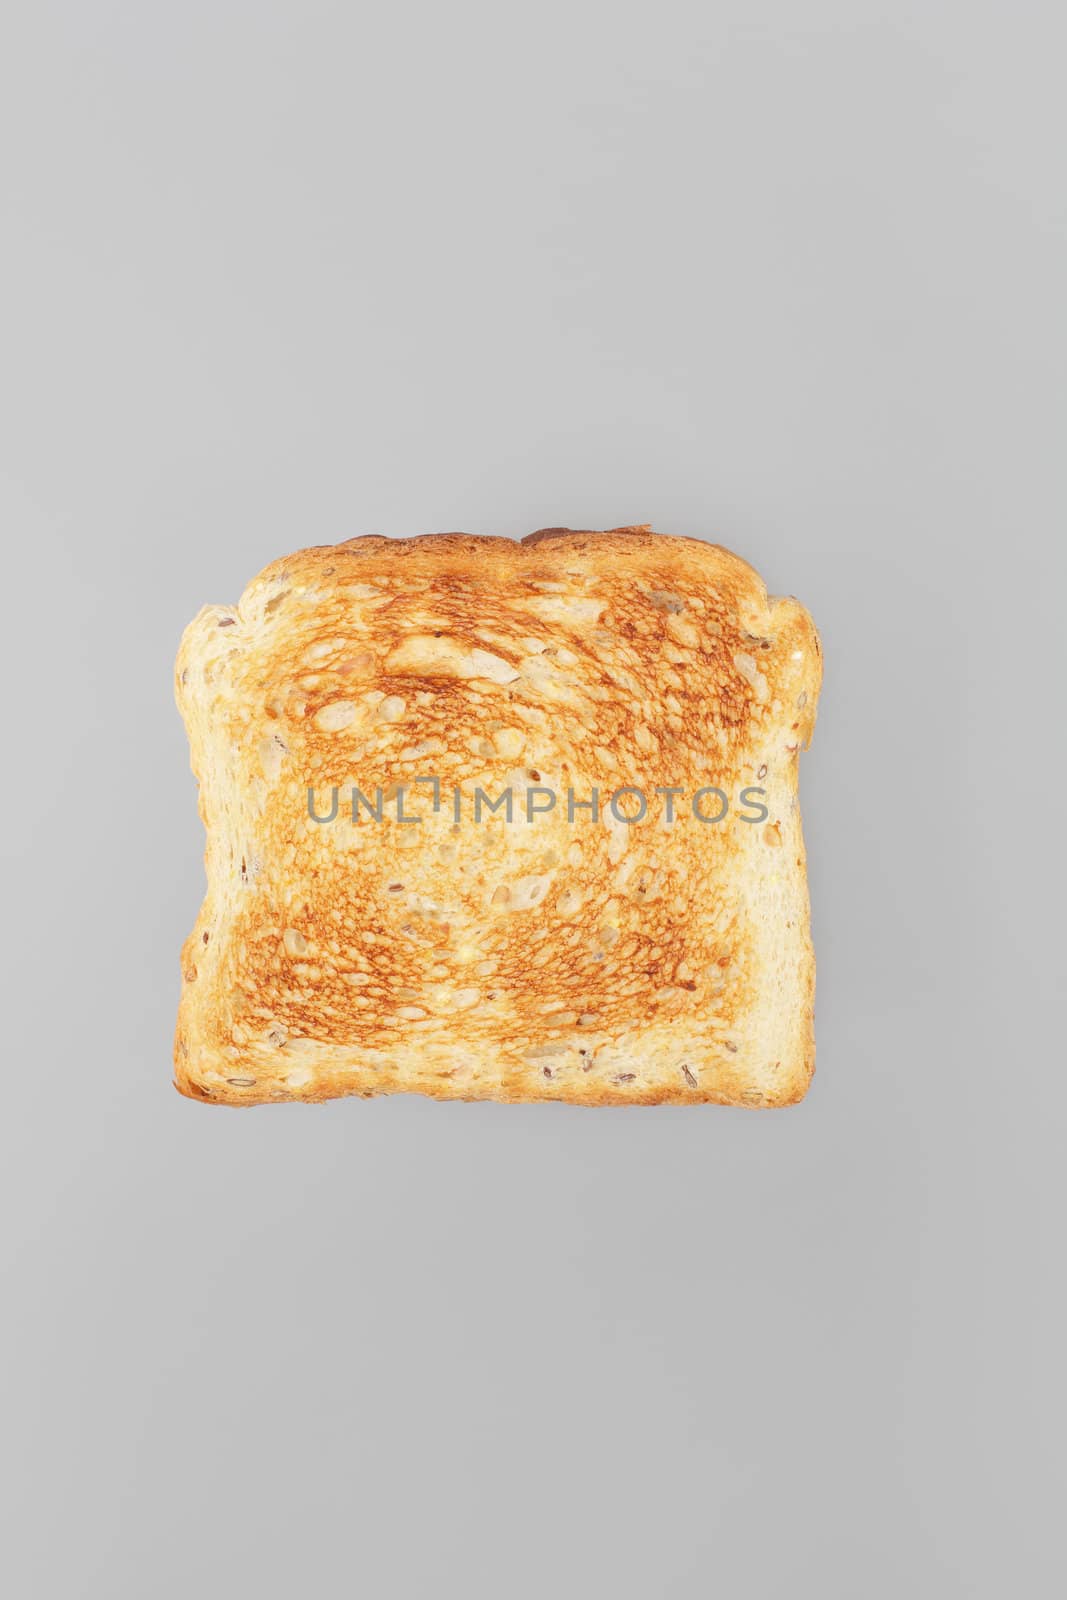 Toast by Stocksnapper